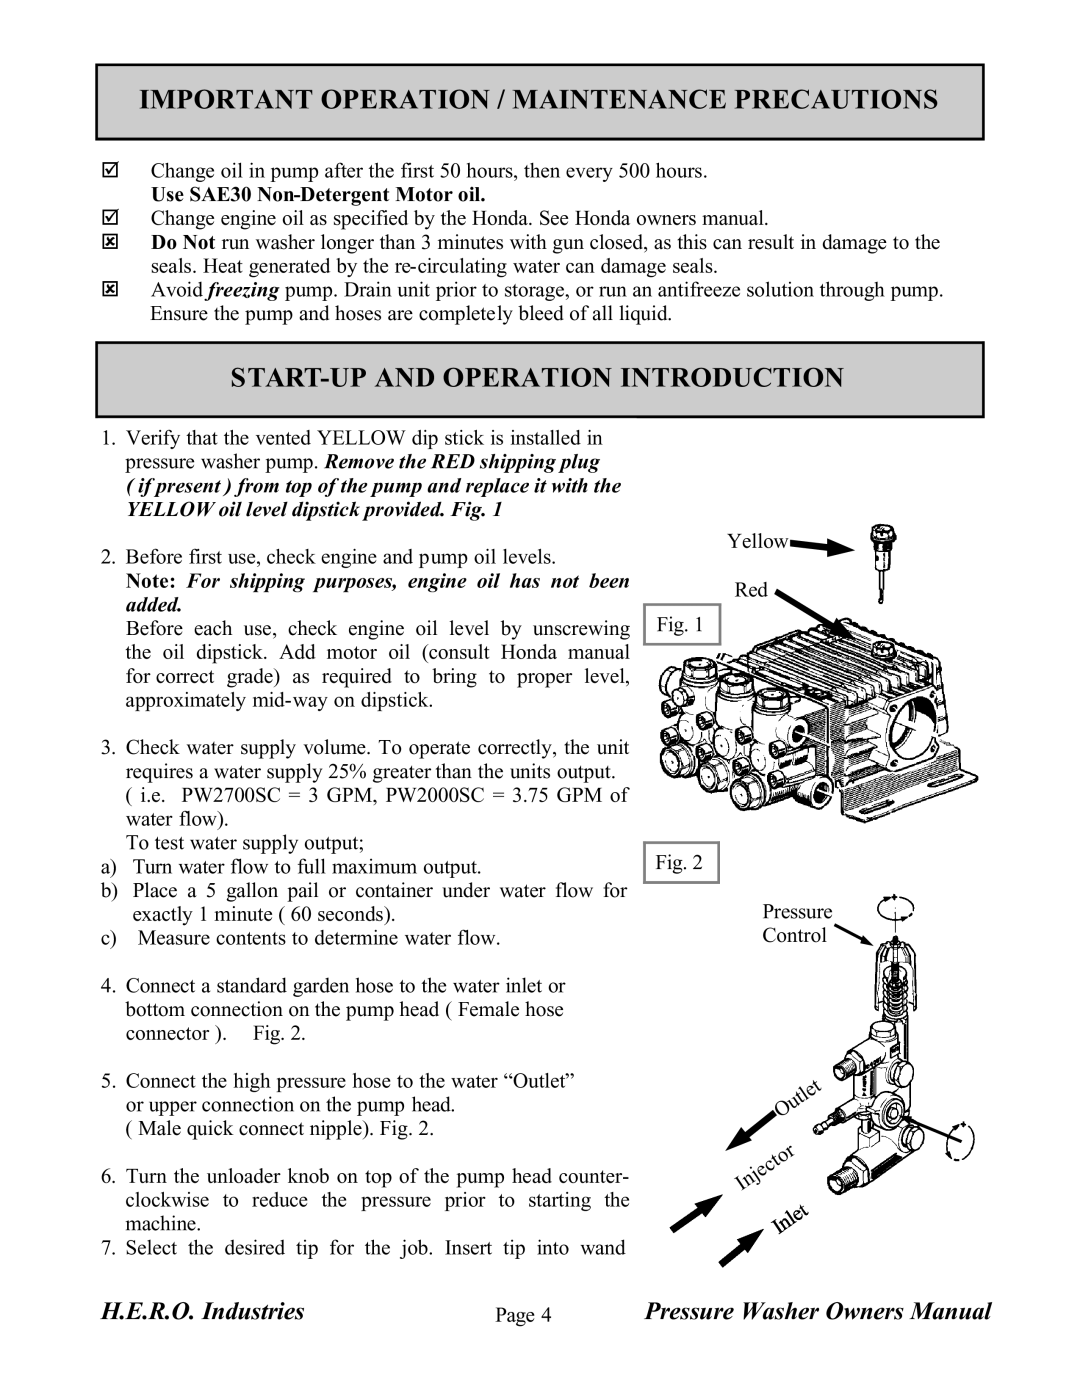 I.C.T.C. Holdings Corporation Pressure Washer Important Operation / Maintenance Precautions, H.E.R.O. Industries 